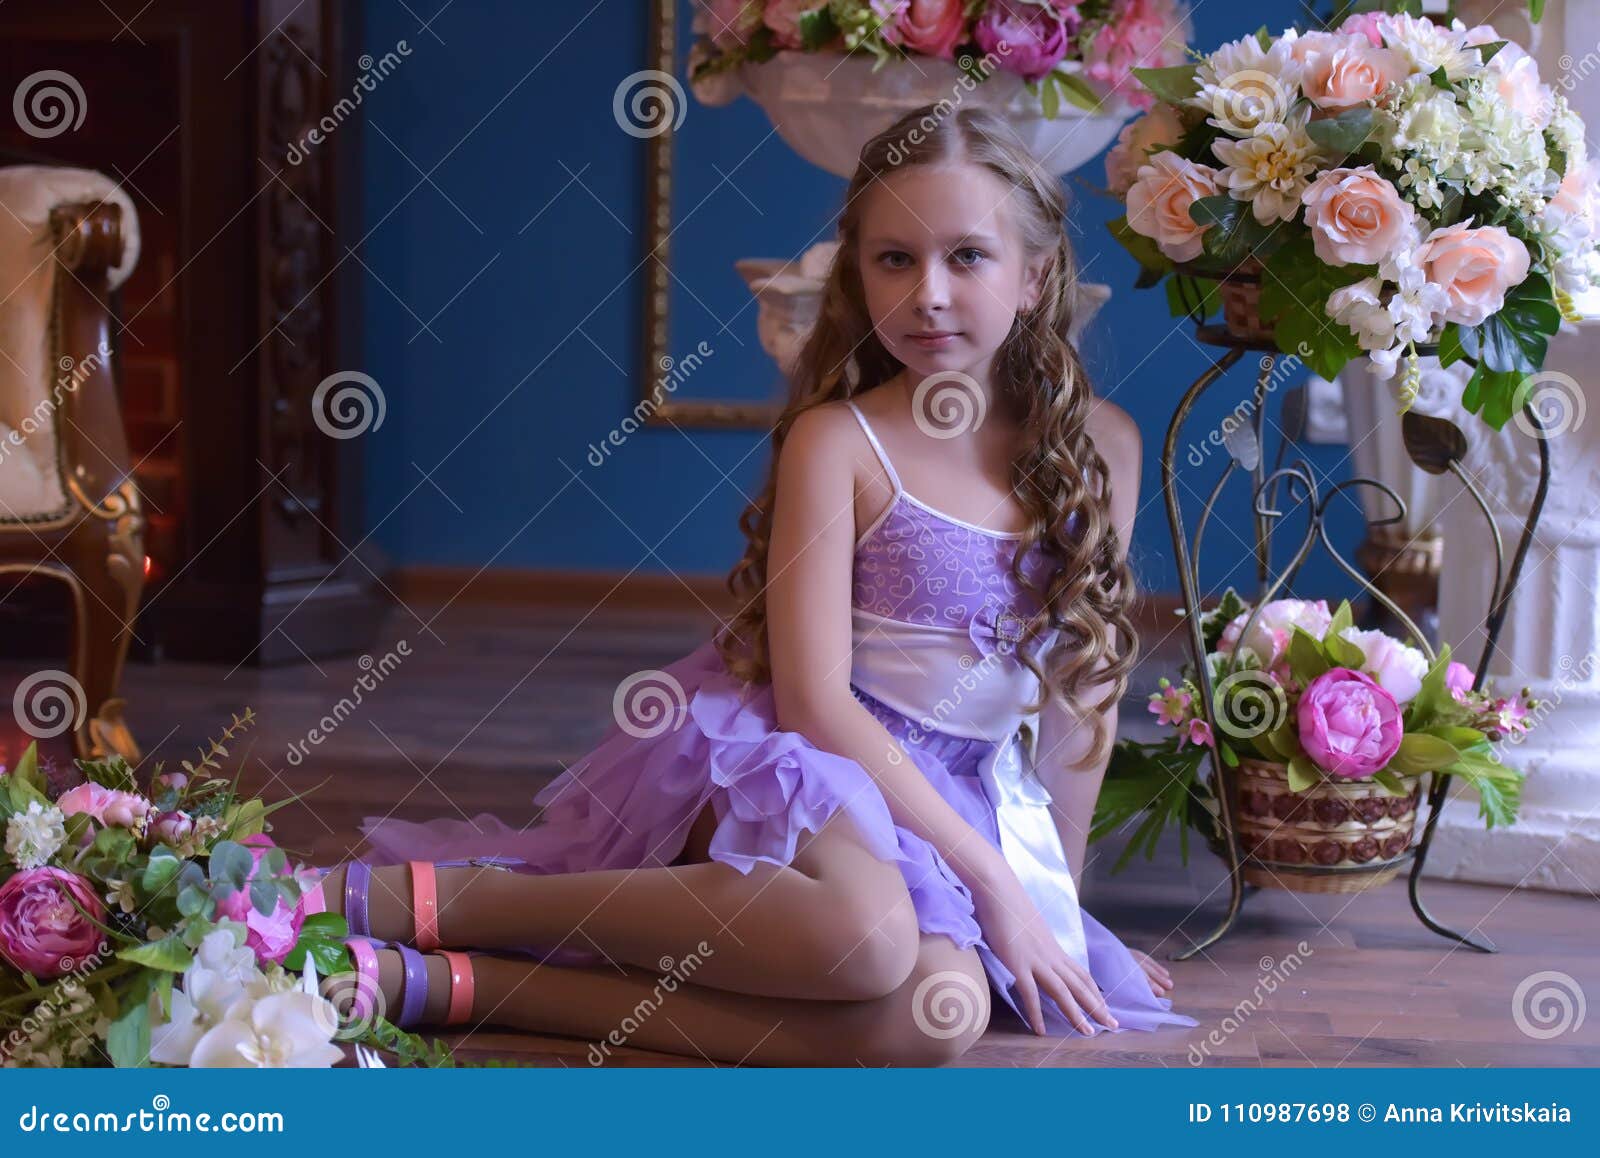 Cute Little Girl in Princess Dress Stock Photo - Image of adorable ...